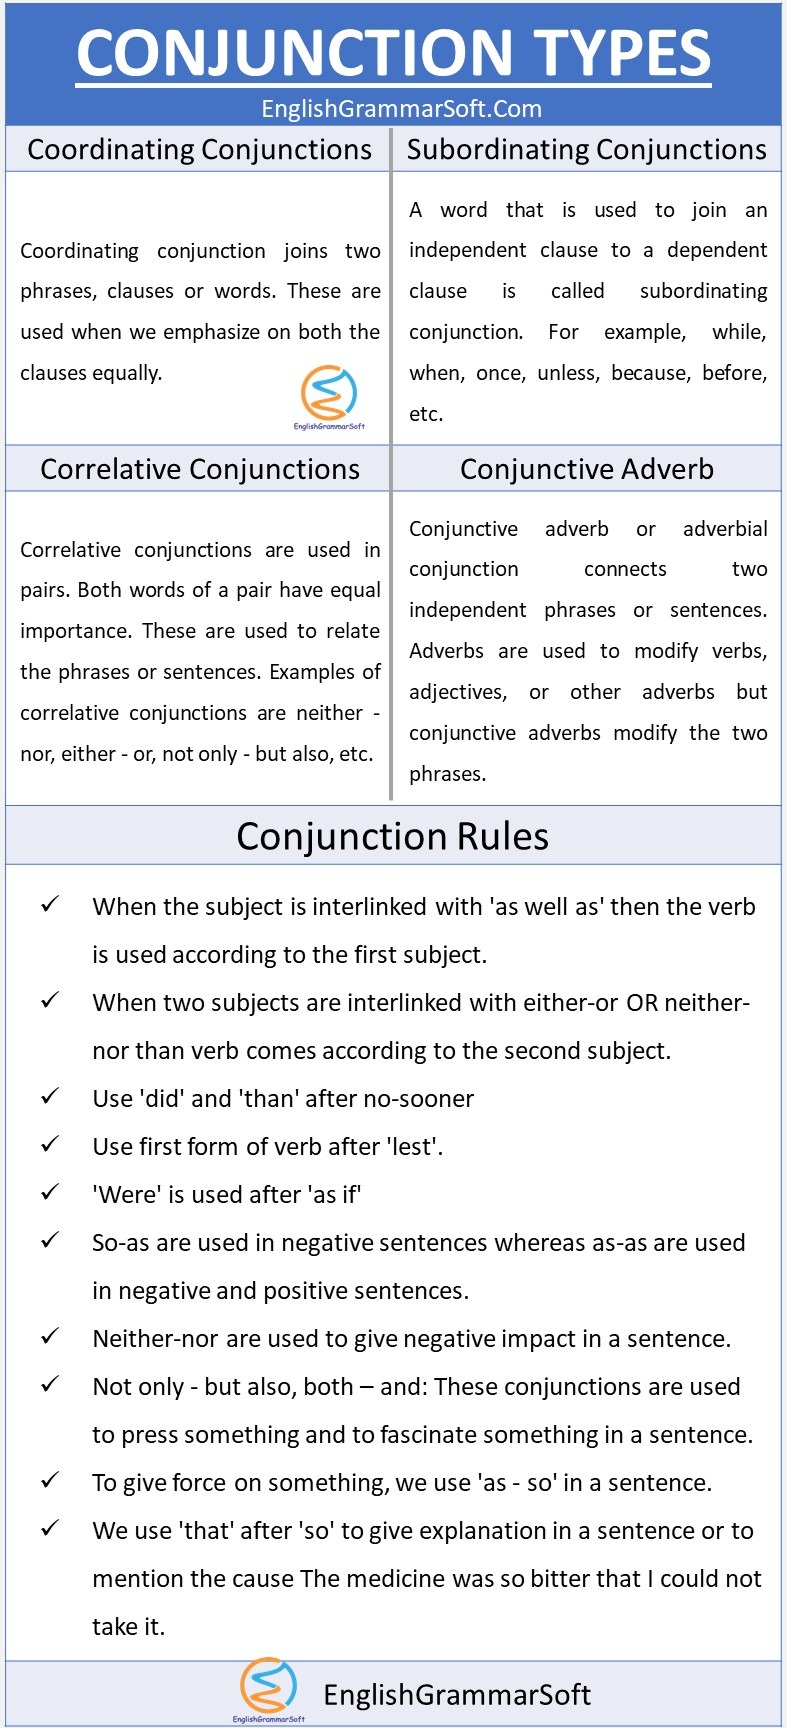 What are the 4 types of conjunctions